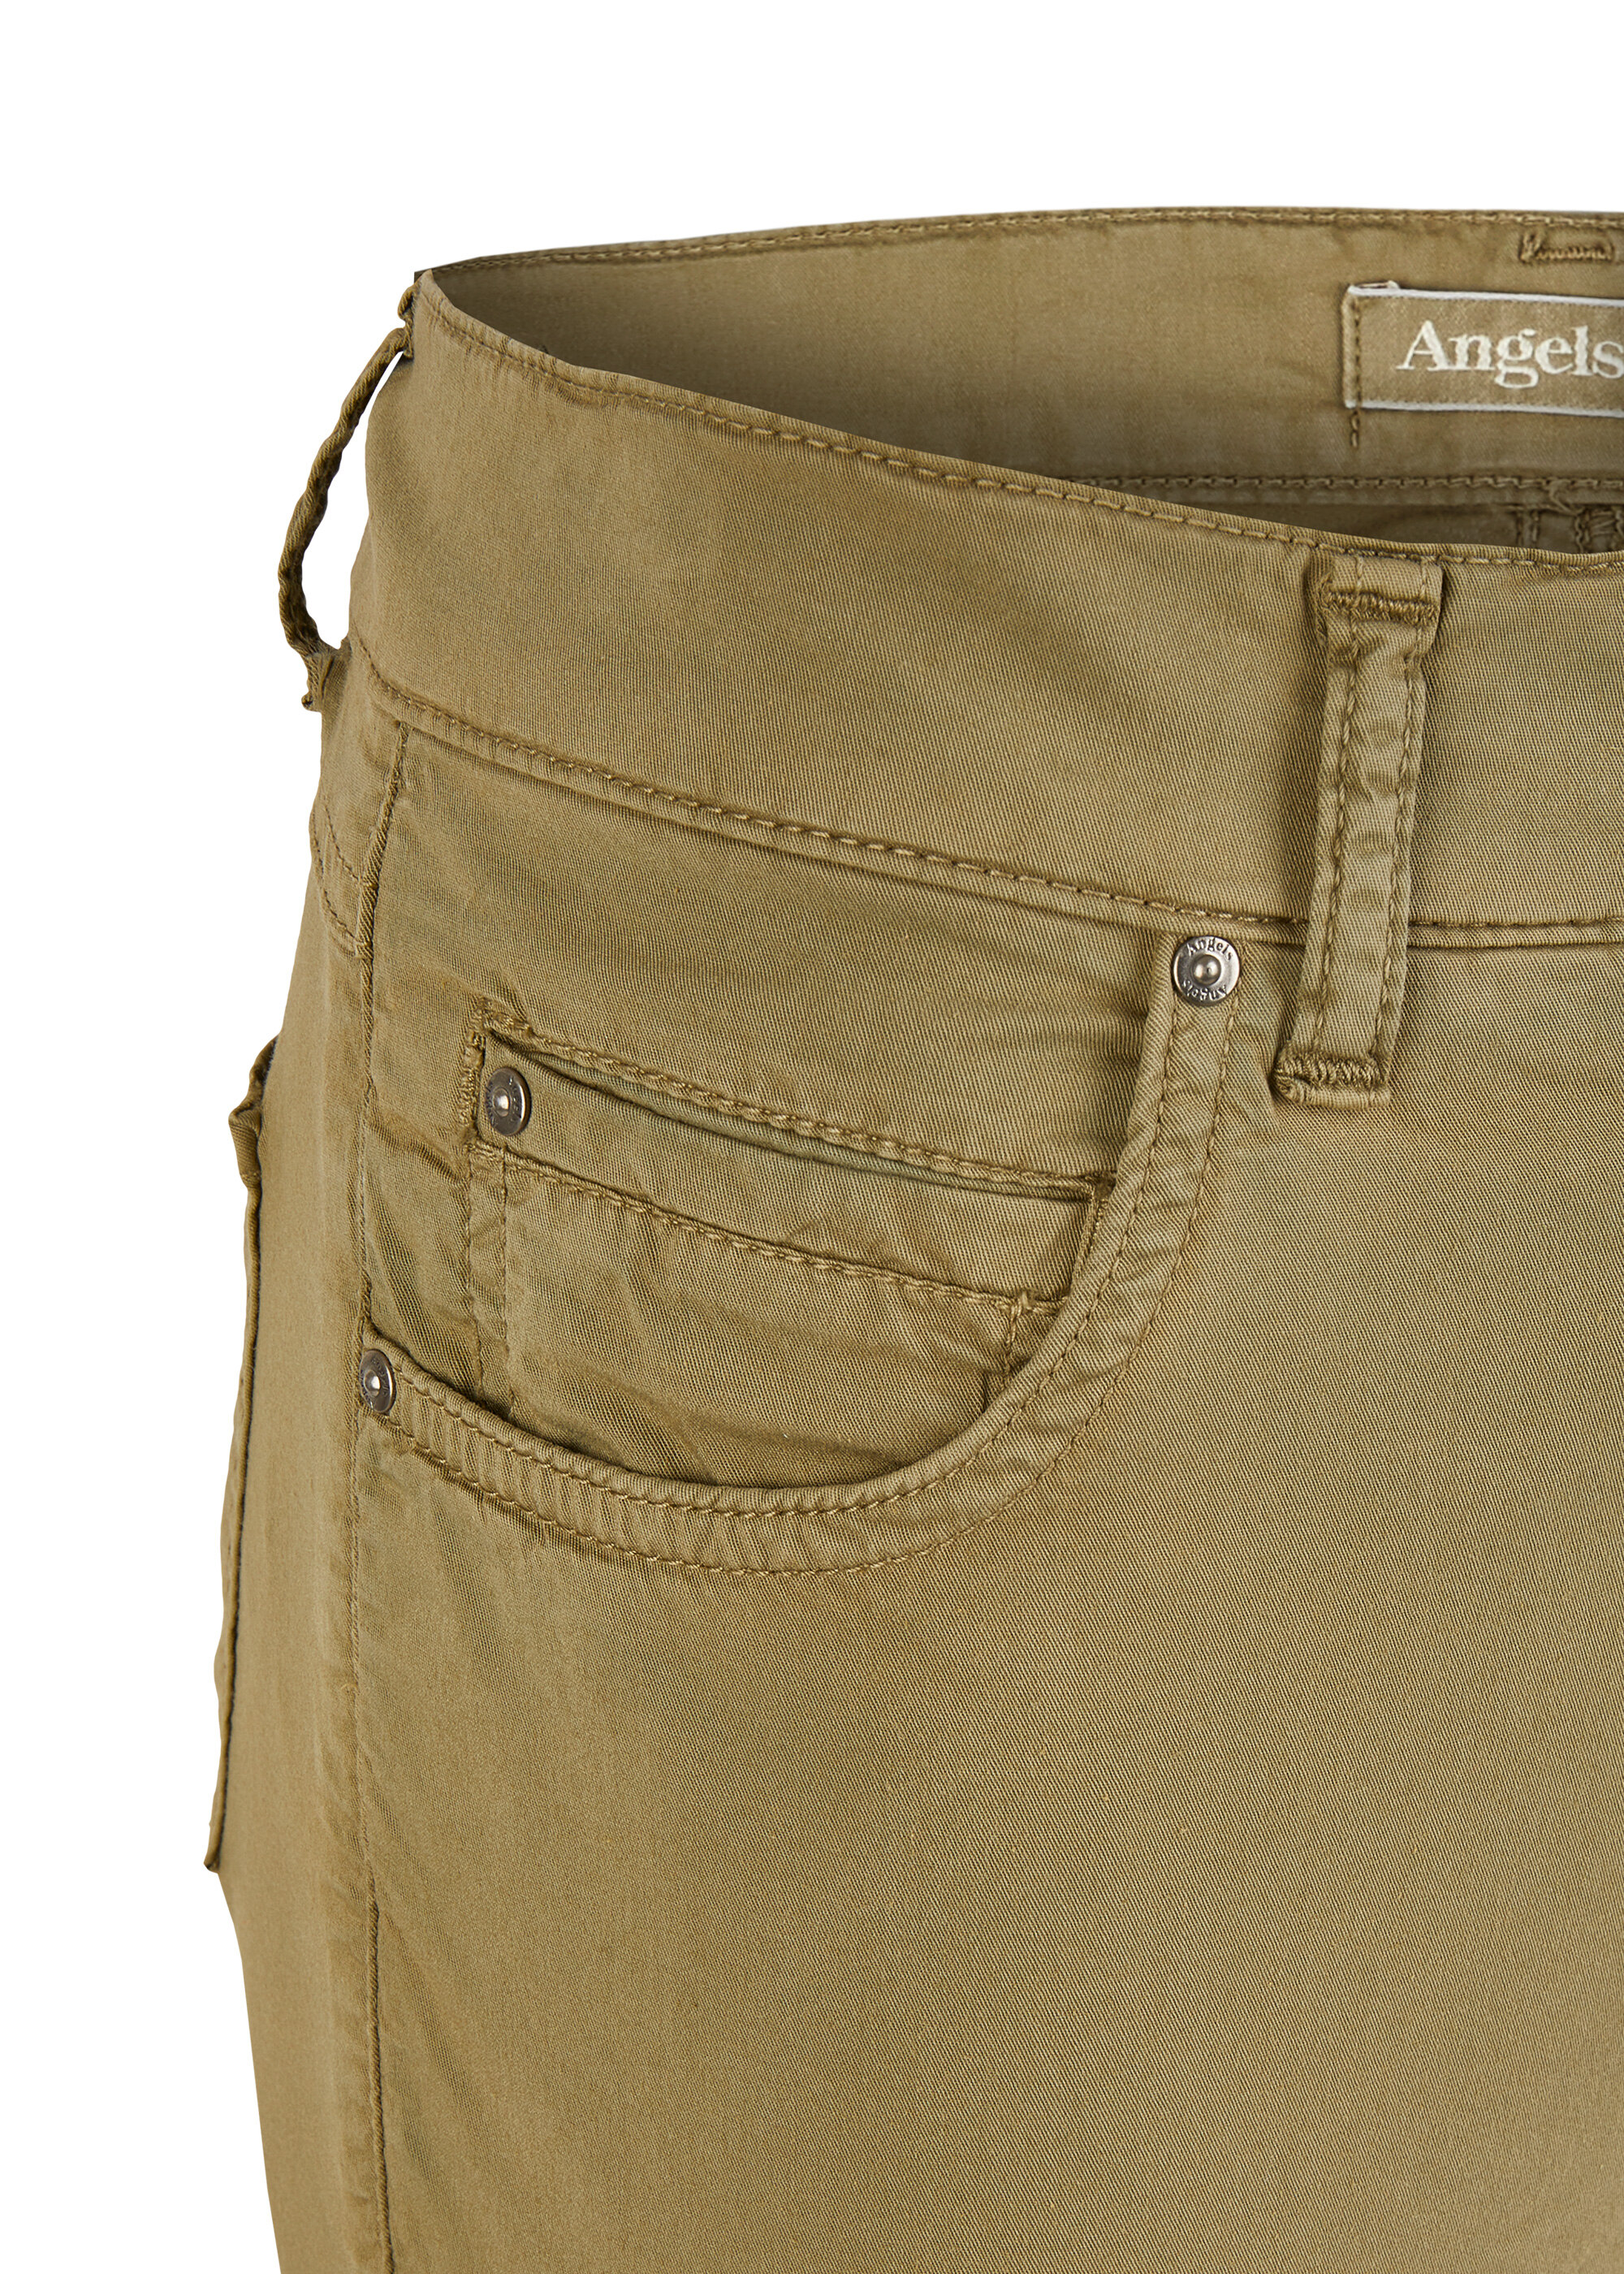 Angels Jeans Cici in Khaki 